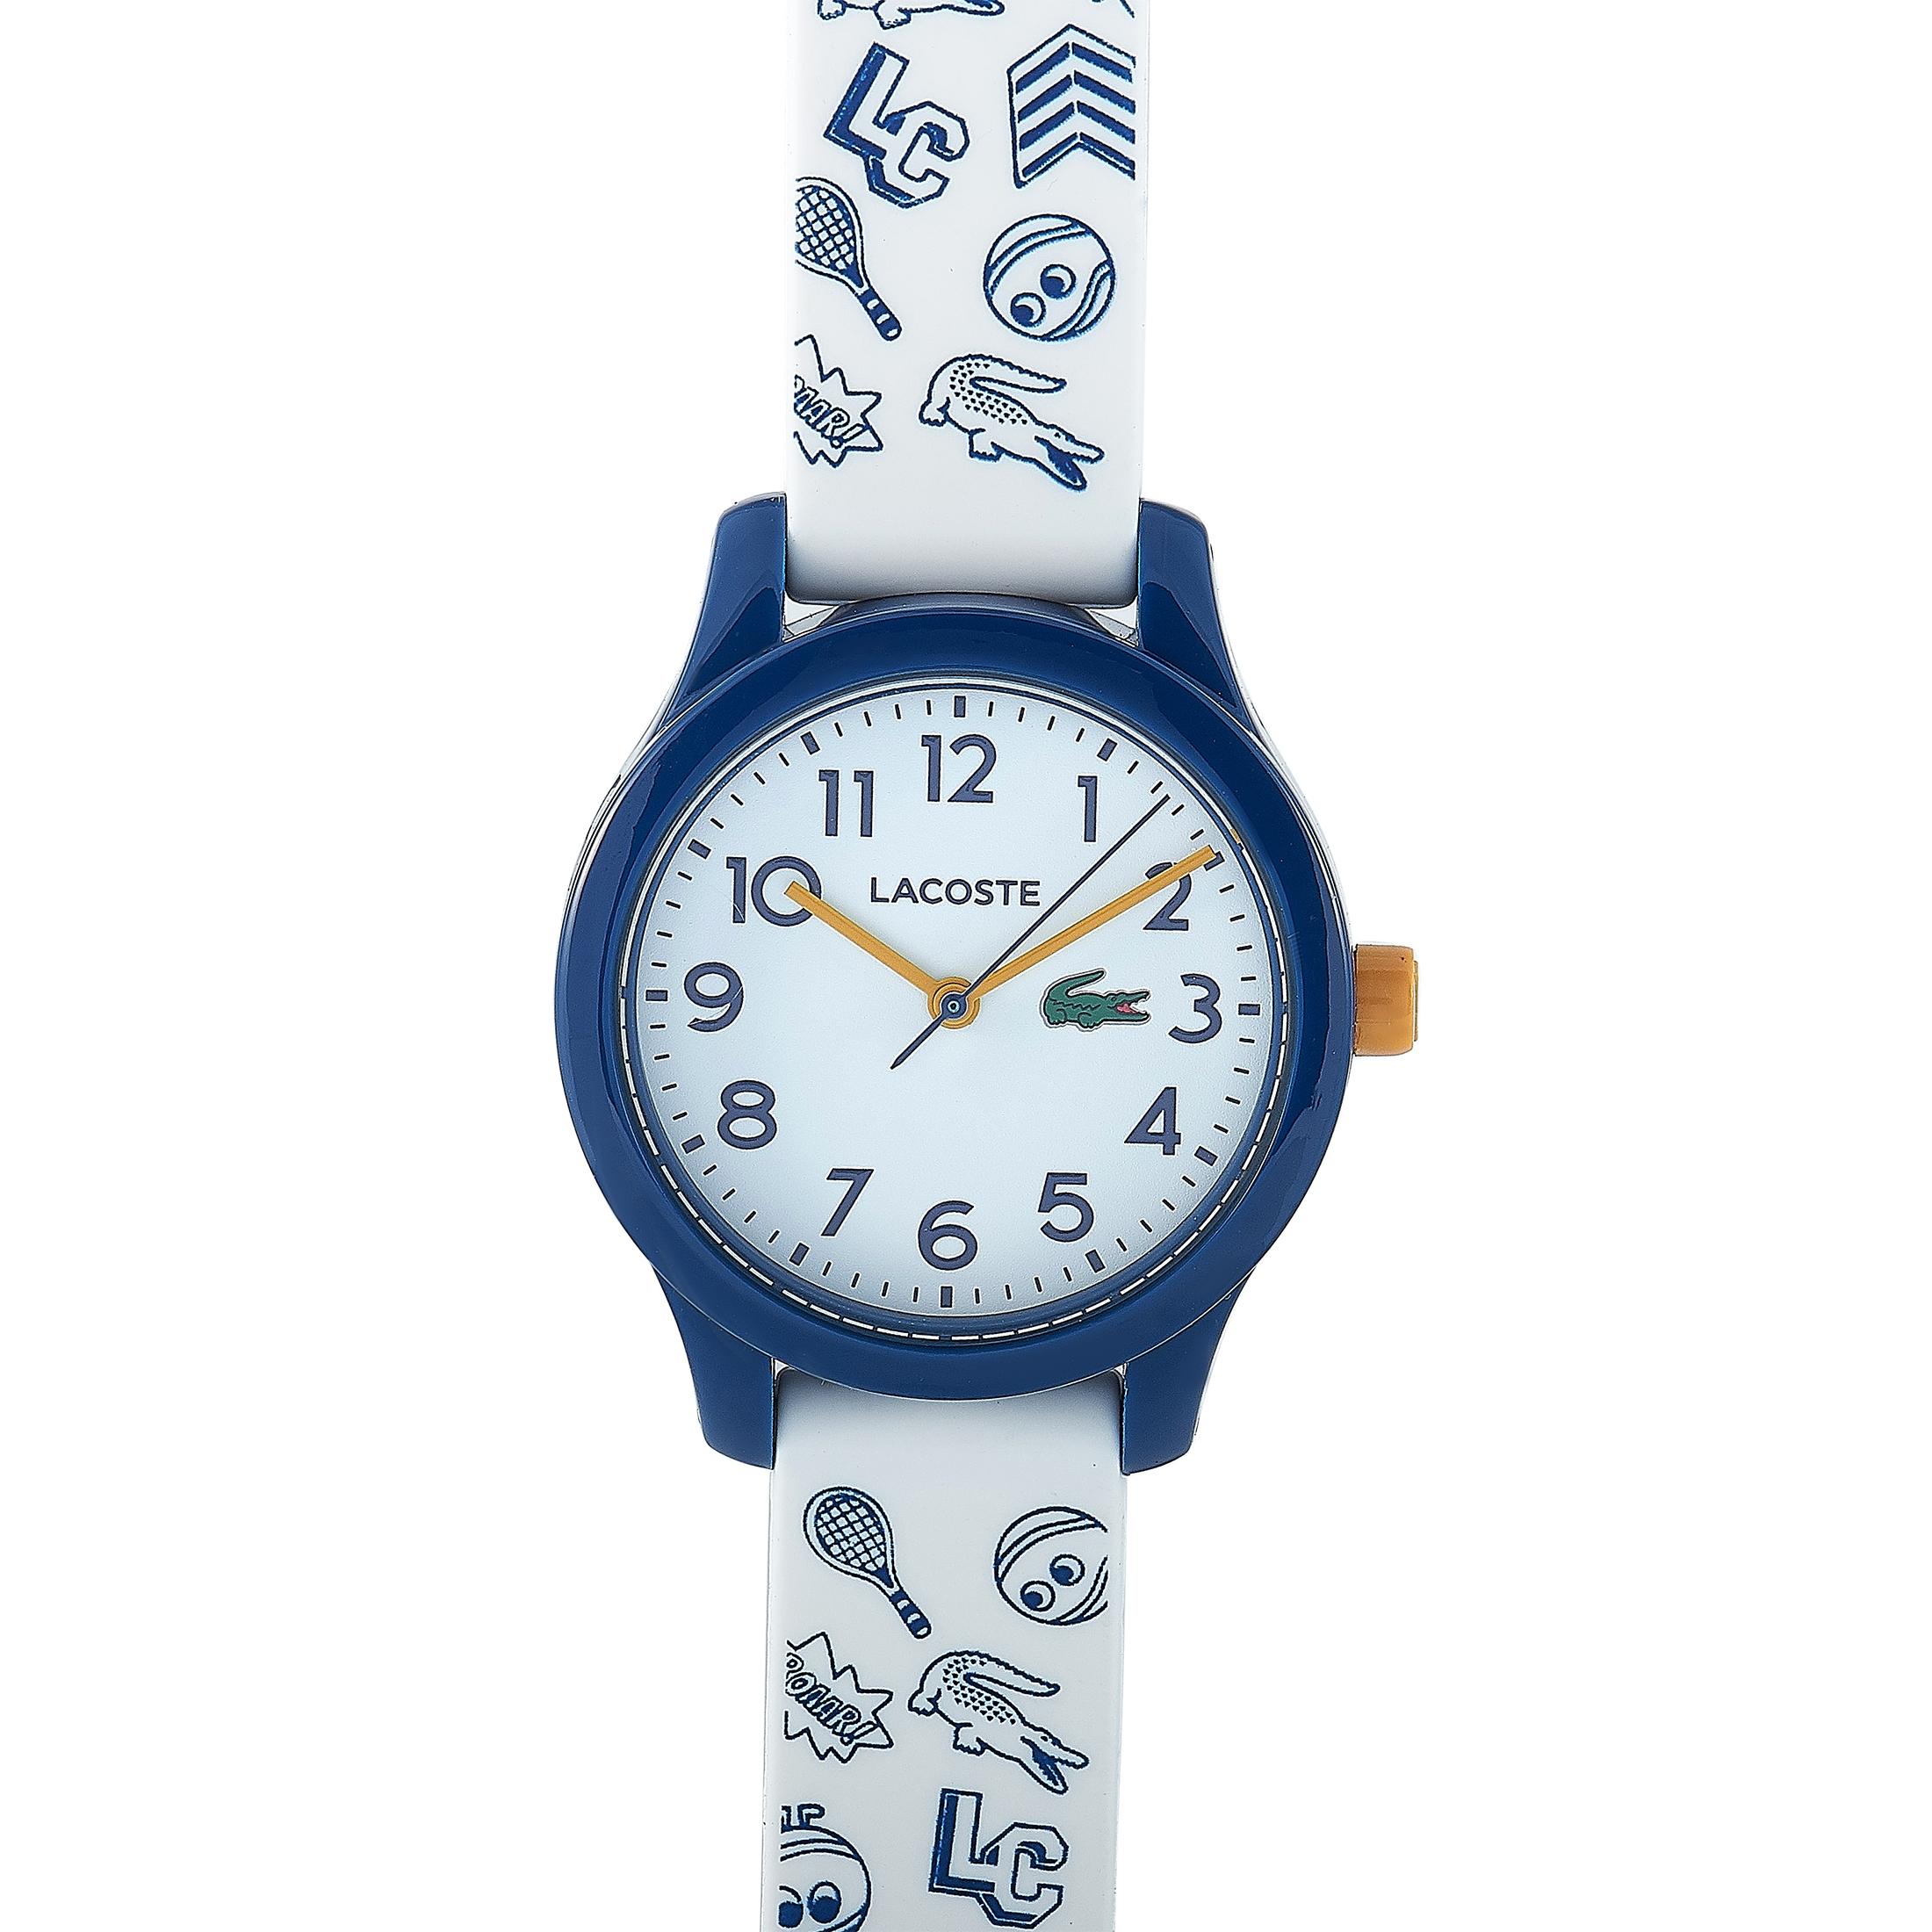 This is the Lacoste 12.12 watch by Lacoste, reference number 2030011.
 
 It is presented with a 32 mm blue case that boasts stainless steel back. The case is water-resistant to 50 meters and mounted onto a white silicone strap with blue